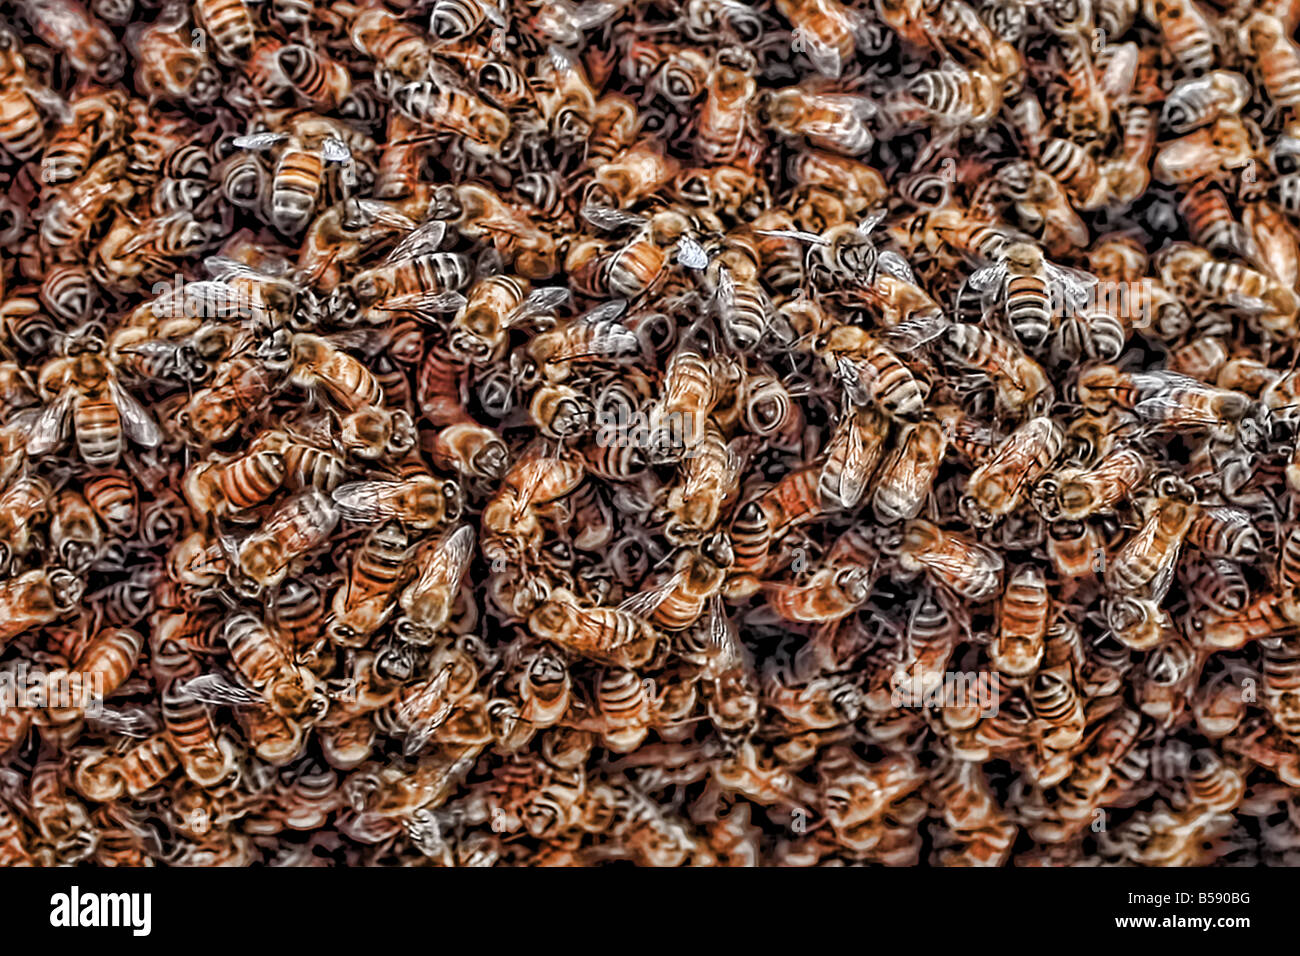 USA. These bees are busy building a bee hive. Stock Photo